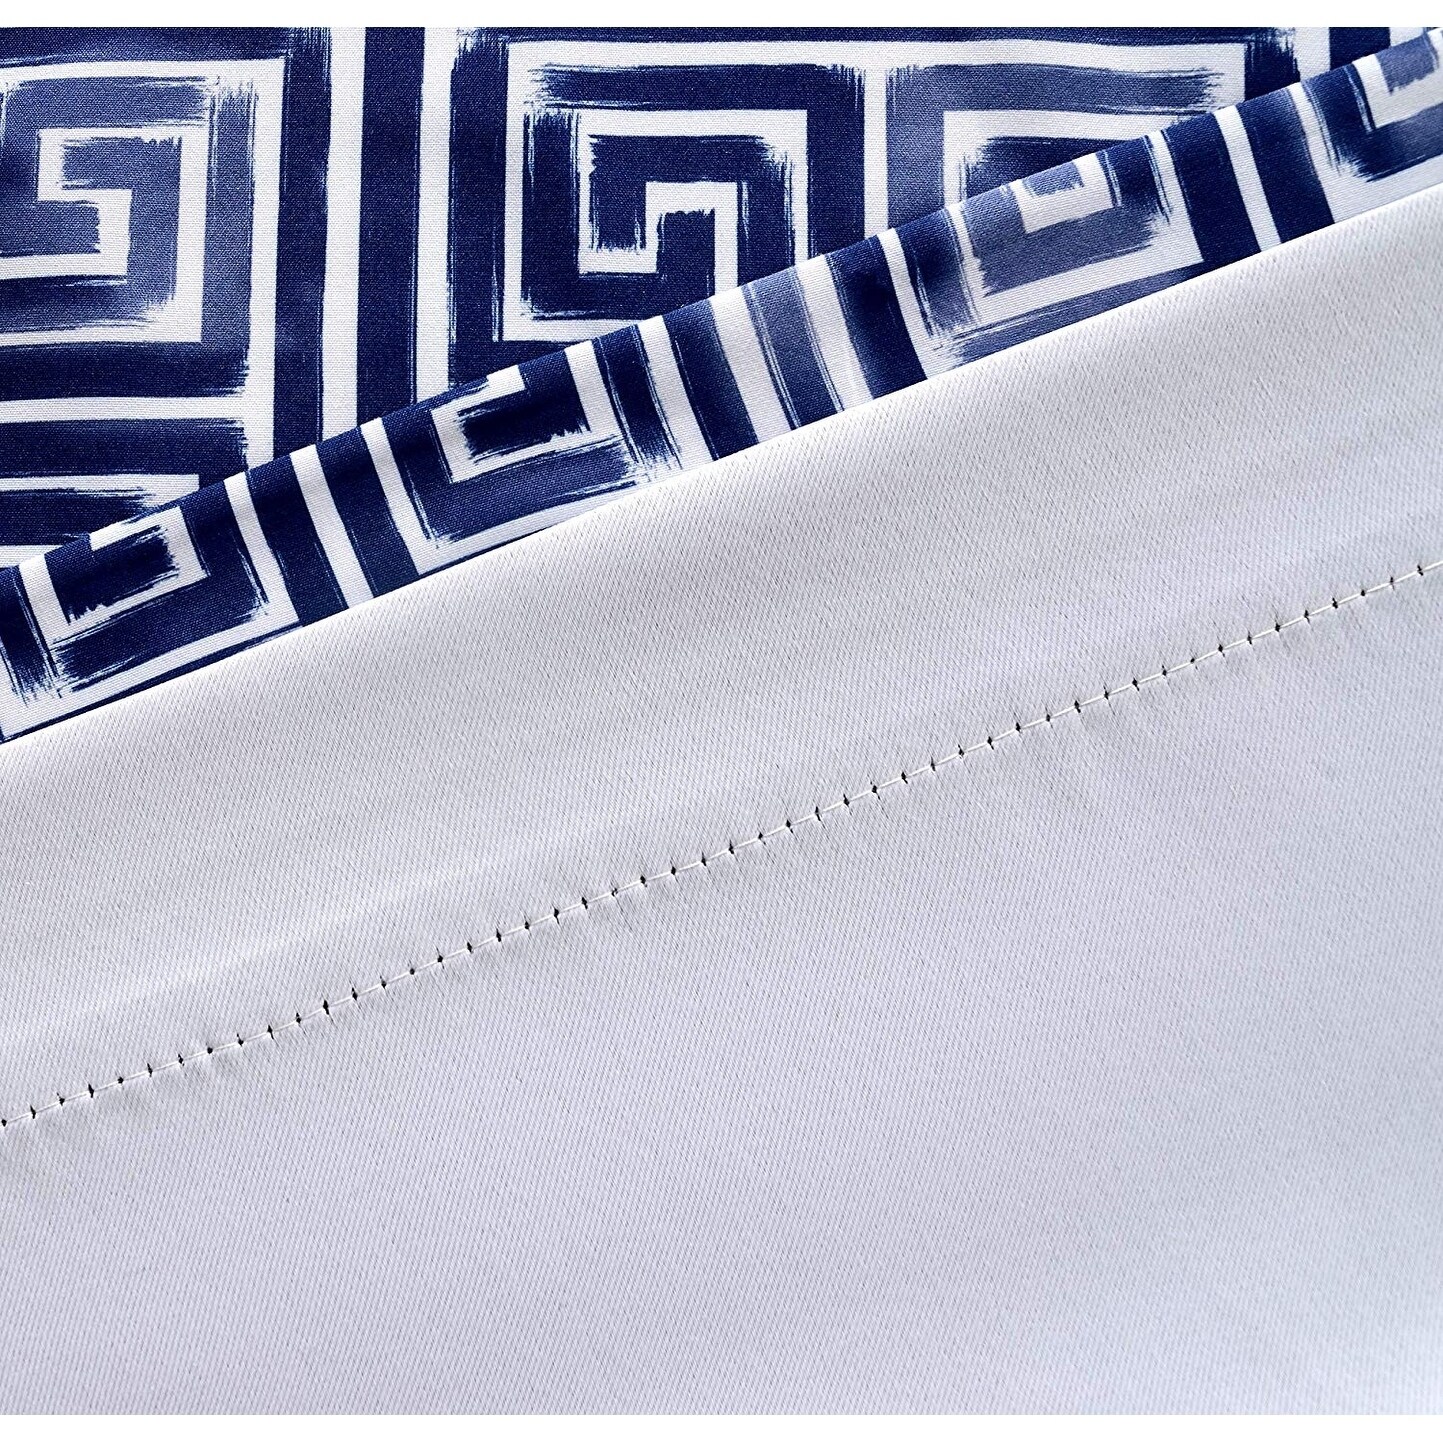 Solid Drapery Panel with Greek Key Trim- classic linen drape with